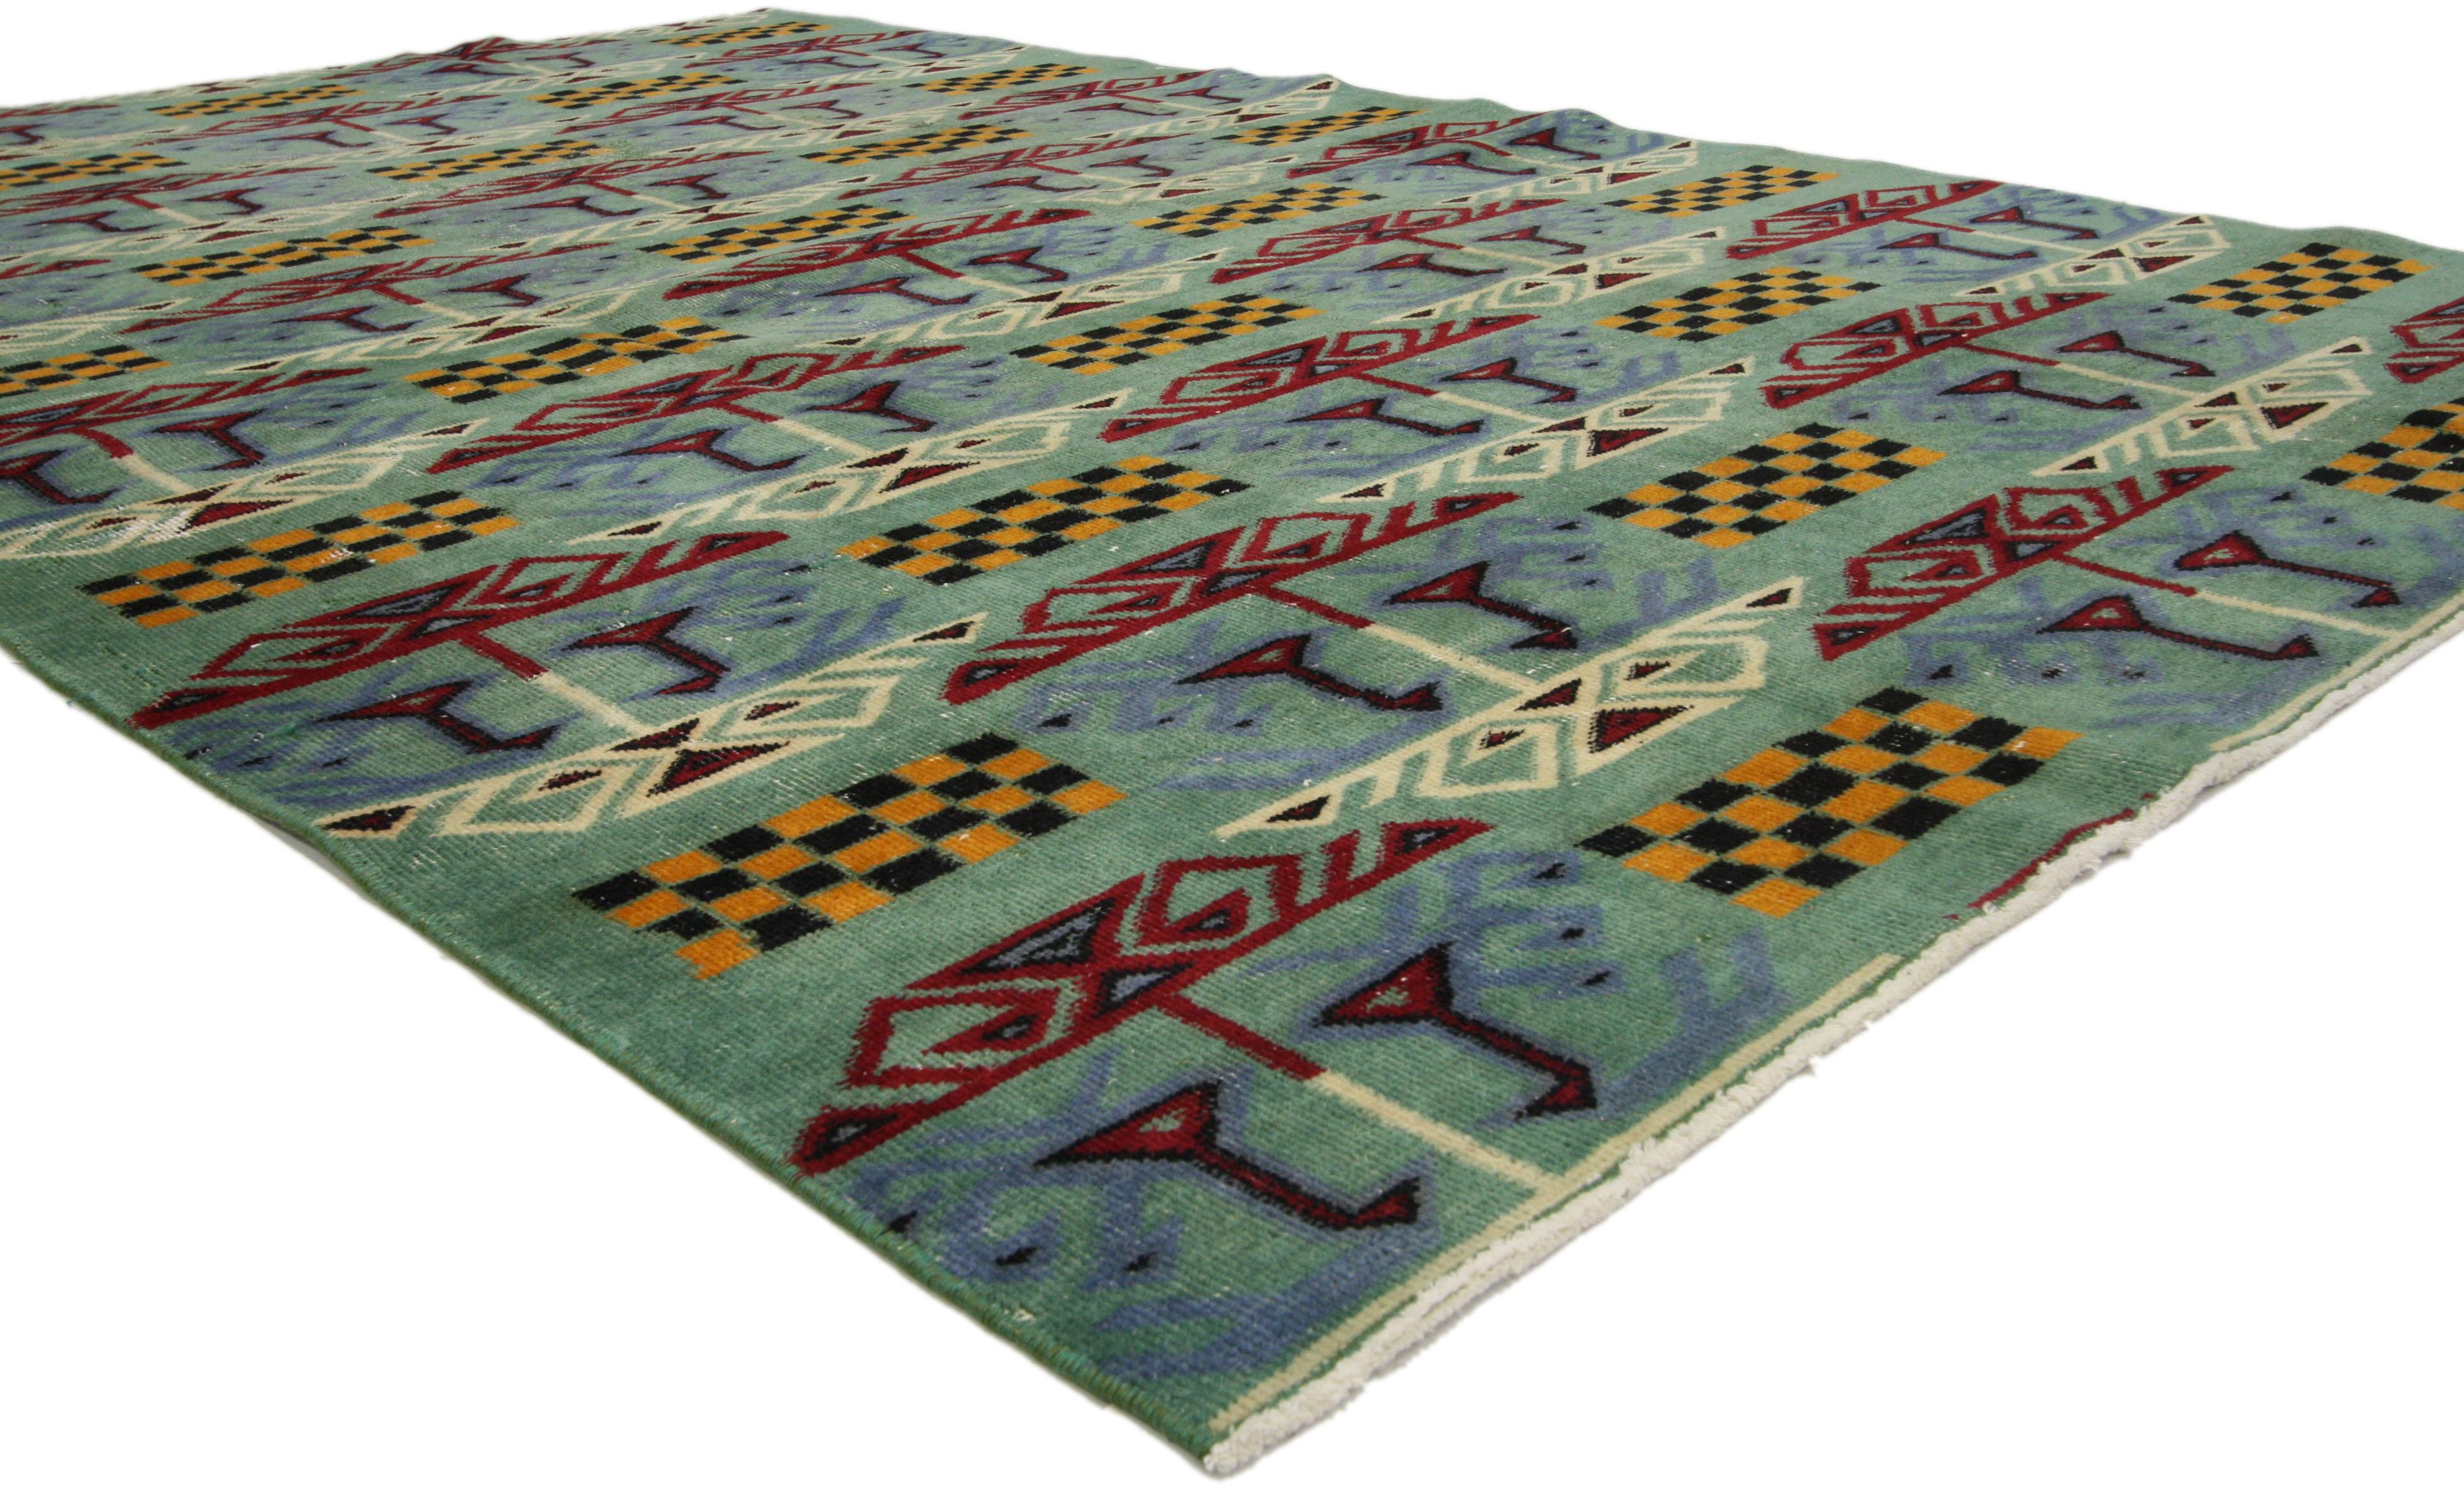 51328 Zeki Muren Distressed Vintage Turkish Sivas Rug with Art Deco Cubism Style 05'08 x 08'11. The bold geometric pattern and contrasting colors woven into this hand knotted wool distressed vintage Turkish Sivas rug work together creating a truly